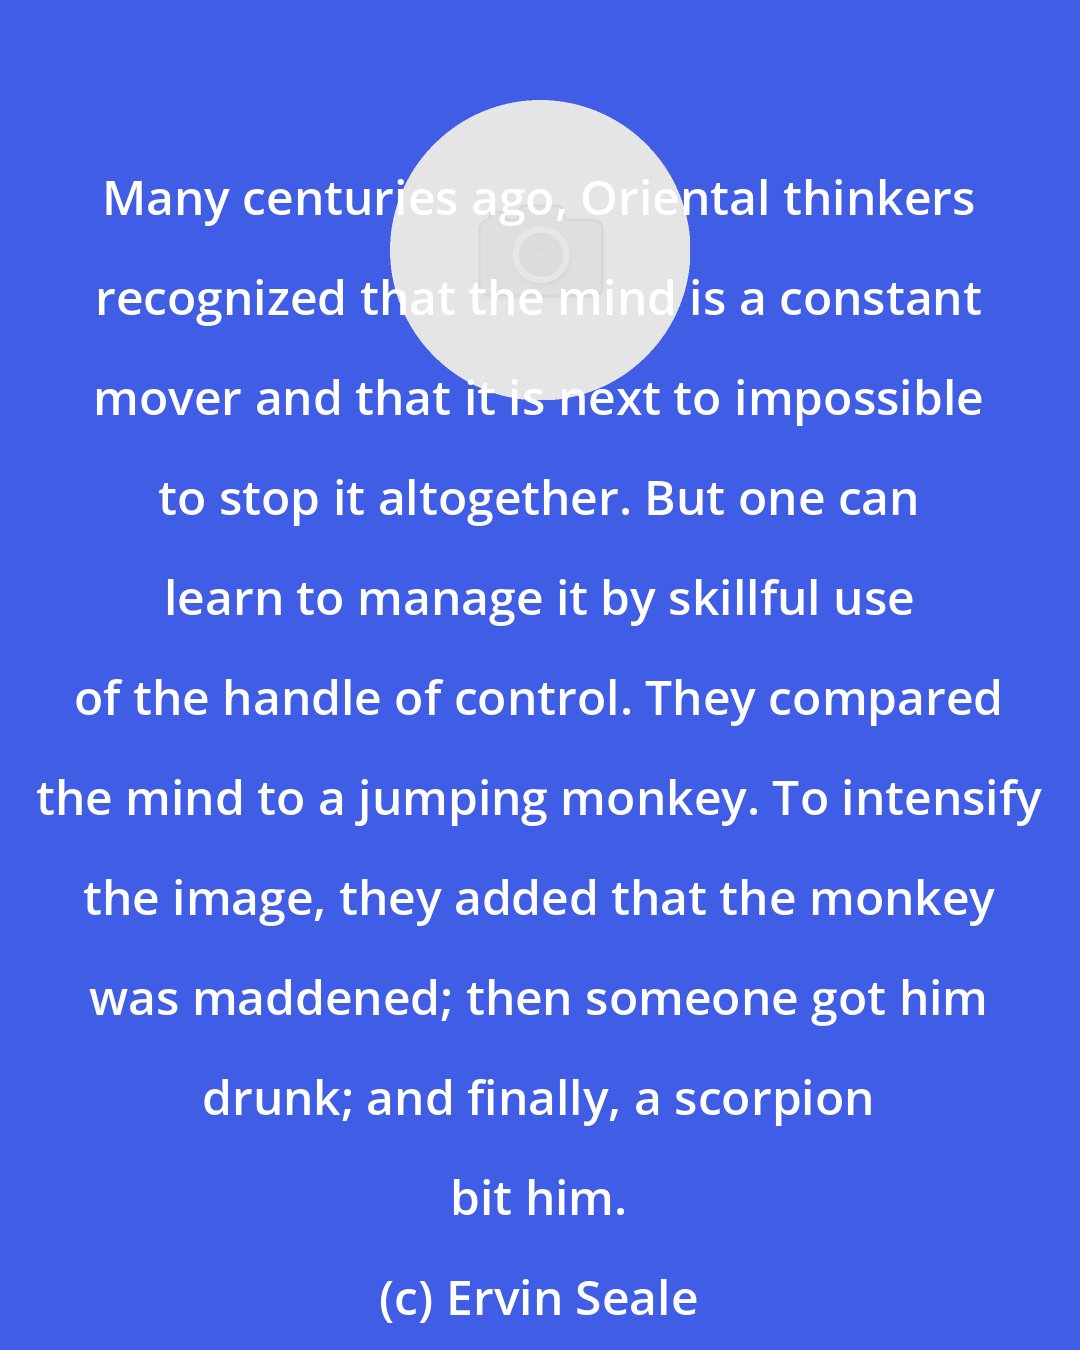 Ervin Seale: Many centuries ago, Oriental thinkers recognized that the mind is a constant mover and that it is next to impossible to stop it altogether. But one can learn to manage it by skillful use of the handle of control. They compared the mind to a jumping monkey. To intensify the image, they added that the monkey was maddened; then someone got him drunk; and finally, a scorpion bit him.